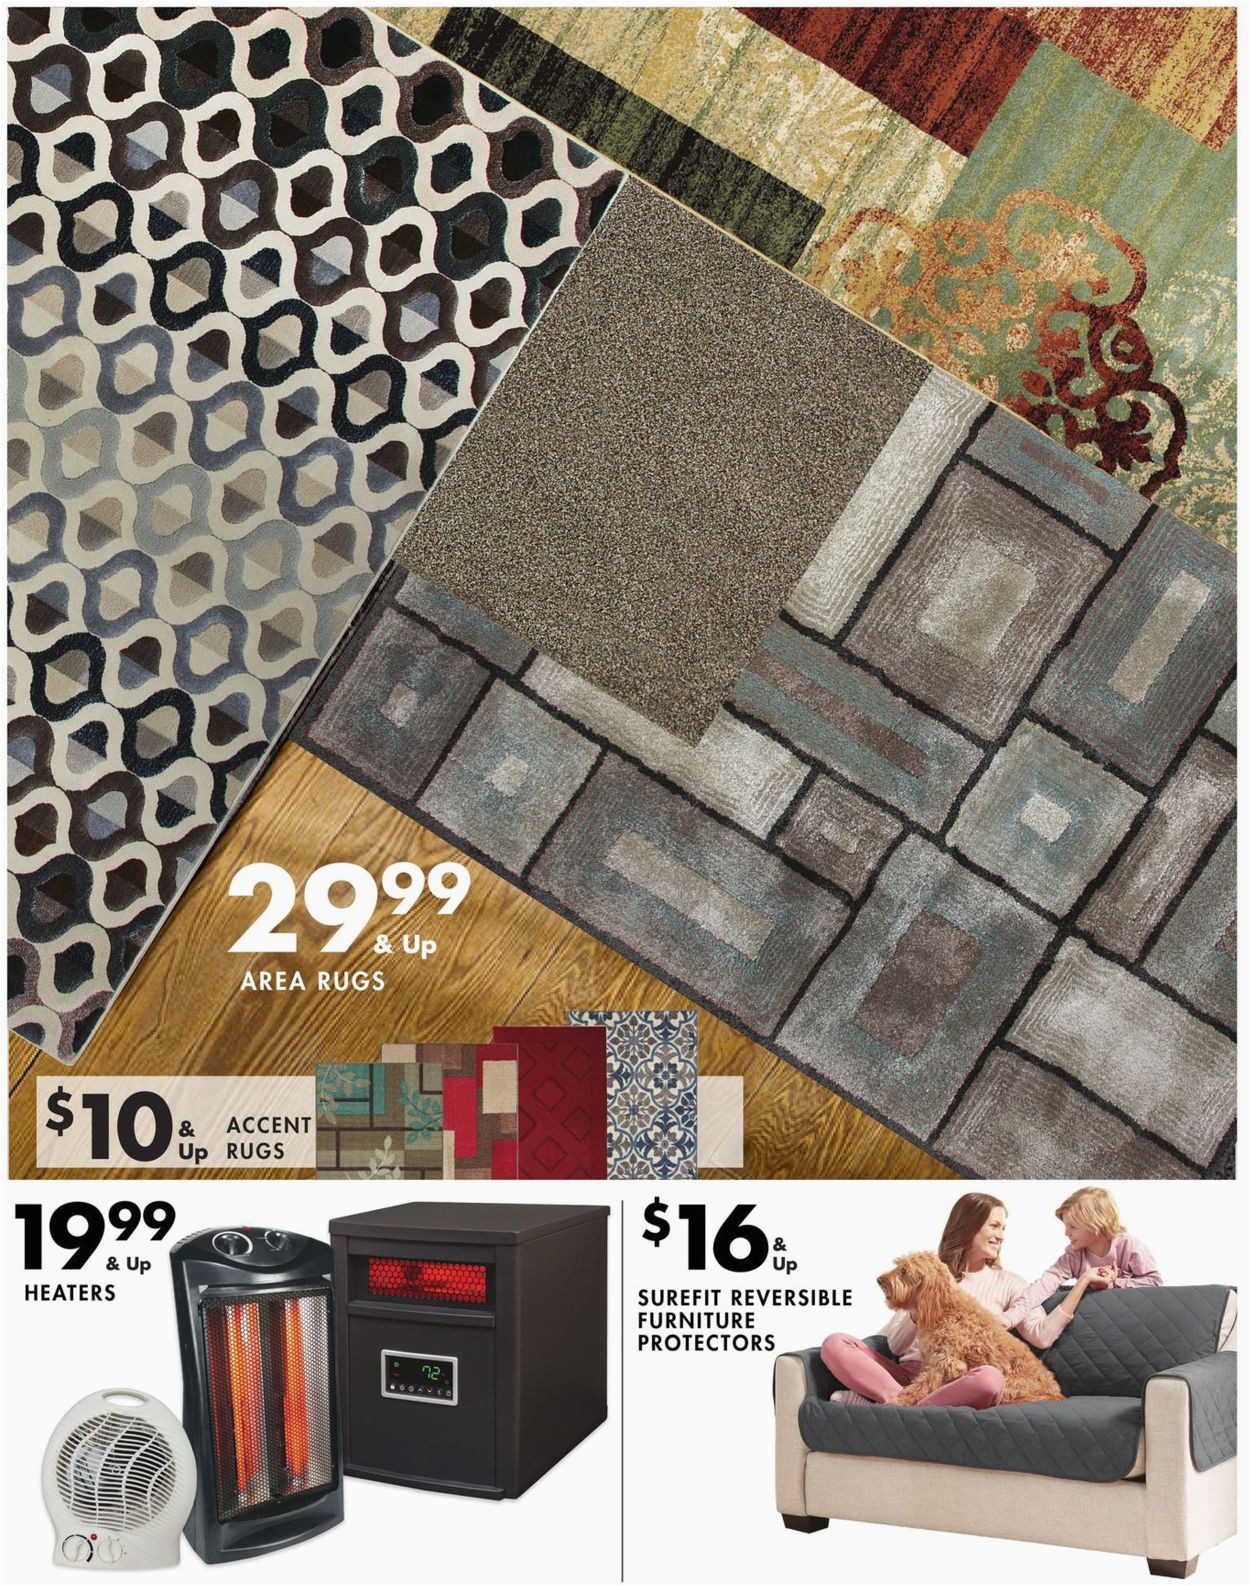 Big Lots area Rugs On Sale Big Lots Current Weekly Ad 11 09 11 16 2019 [9] Frequent